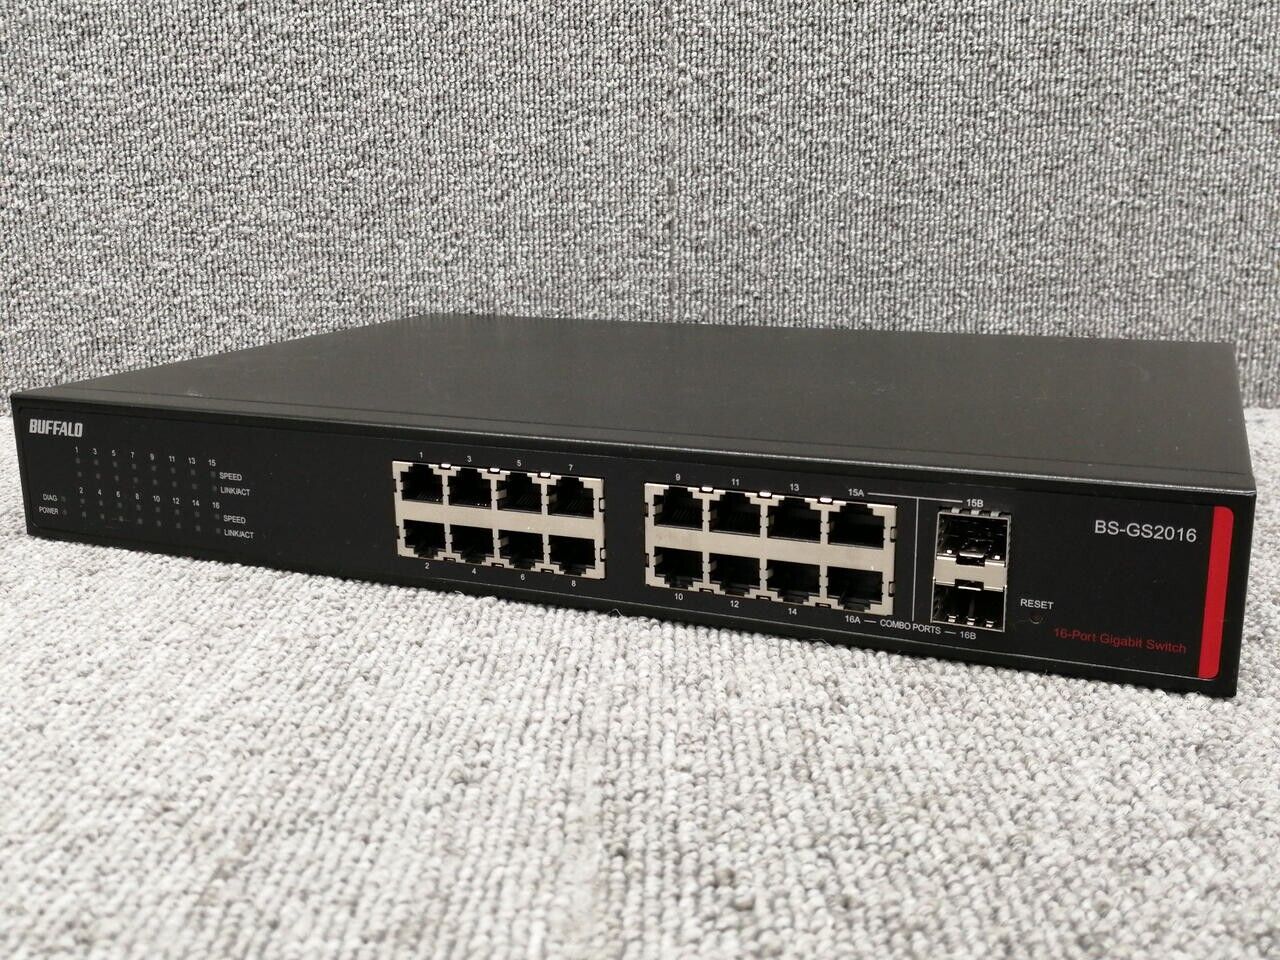 BUFFALO BS-GS2016 Layer 2 Gigabit Smart Switch 16 Ports Built-in Power Used